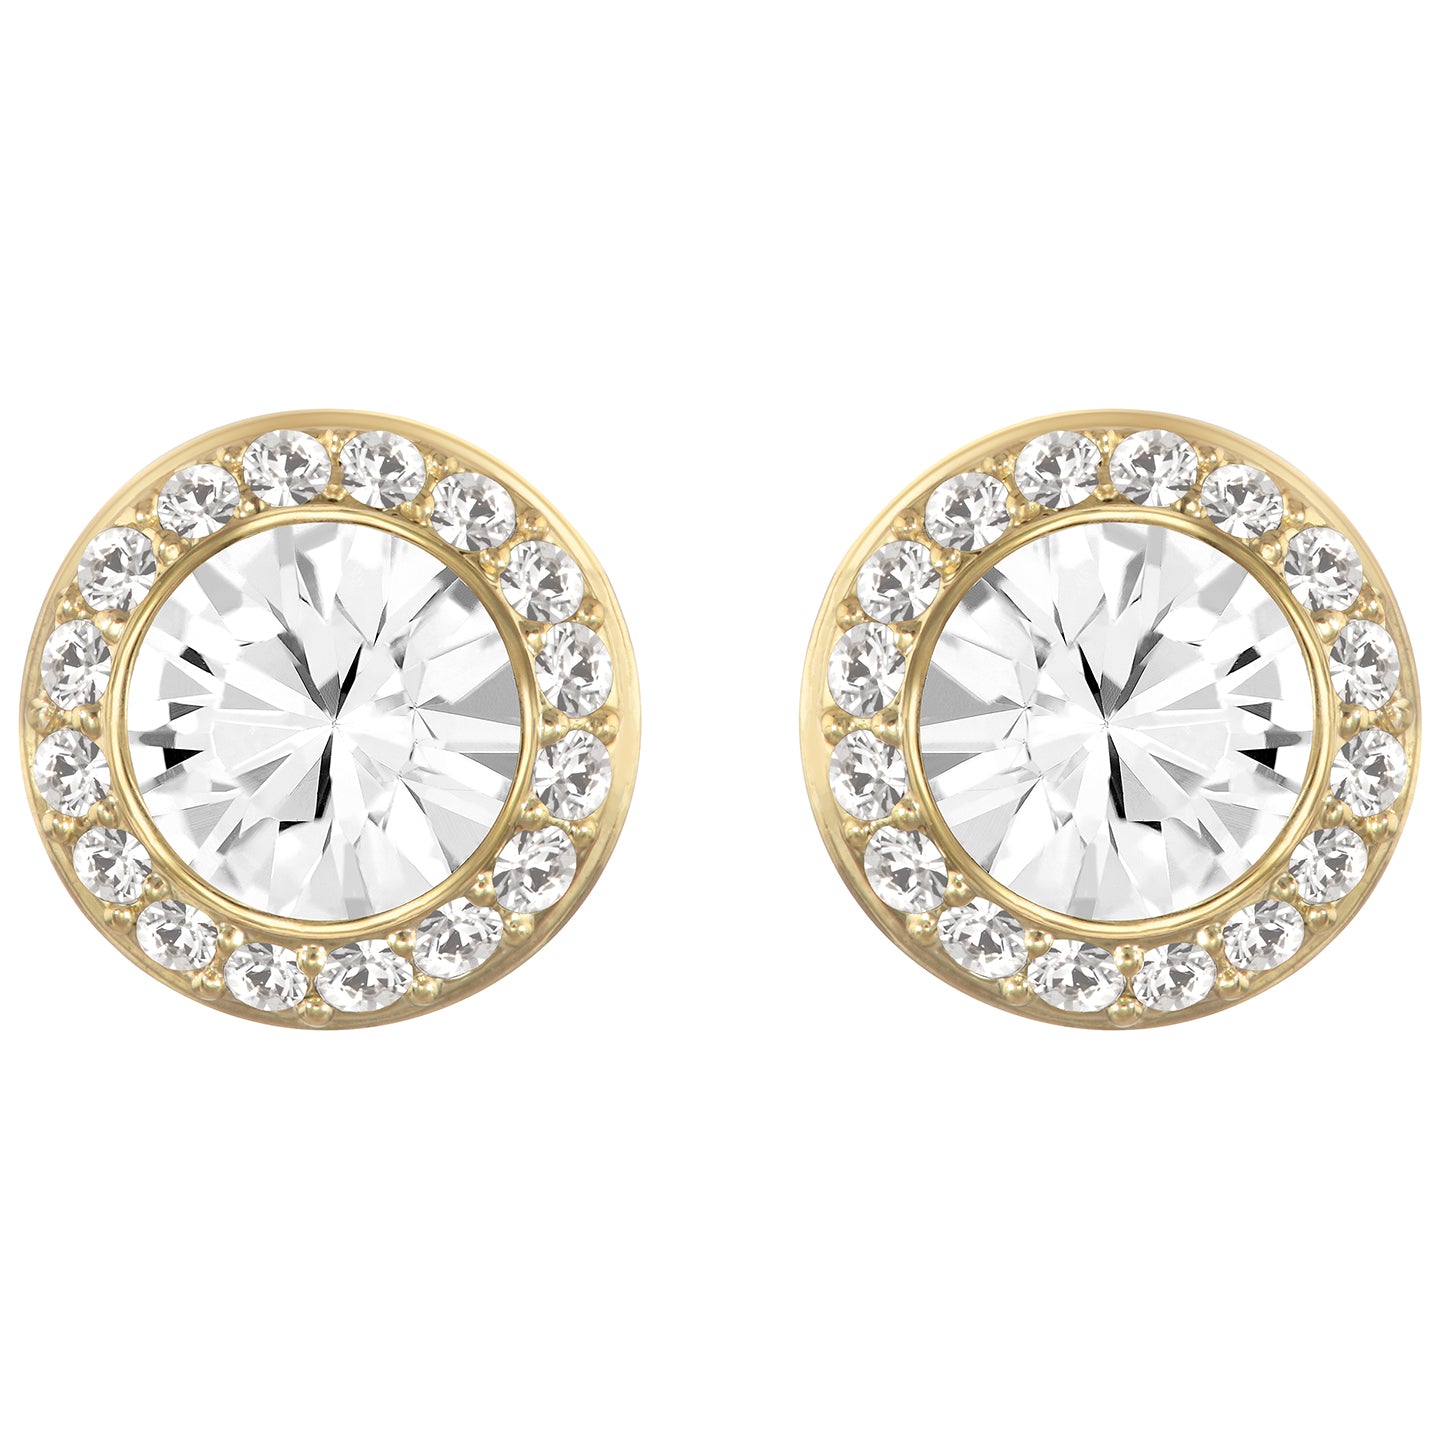 ANGELIC ROUND STUD PIERCED EARRINGS, CRYSTAL, GOLD-TONE PLATED